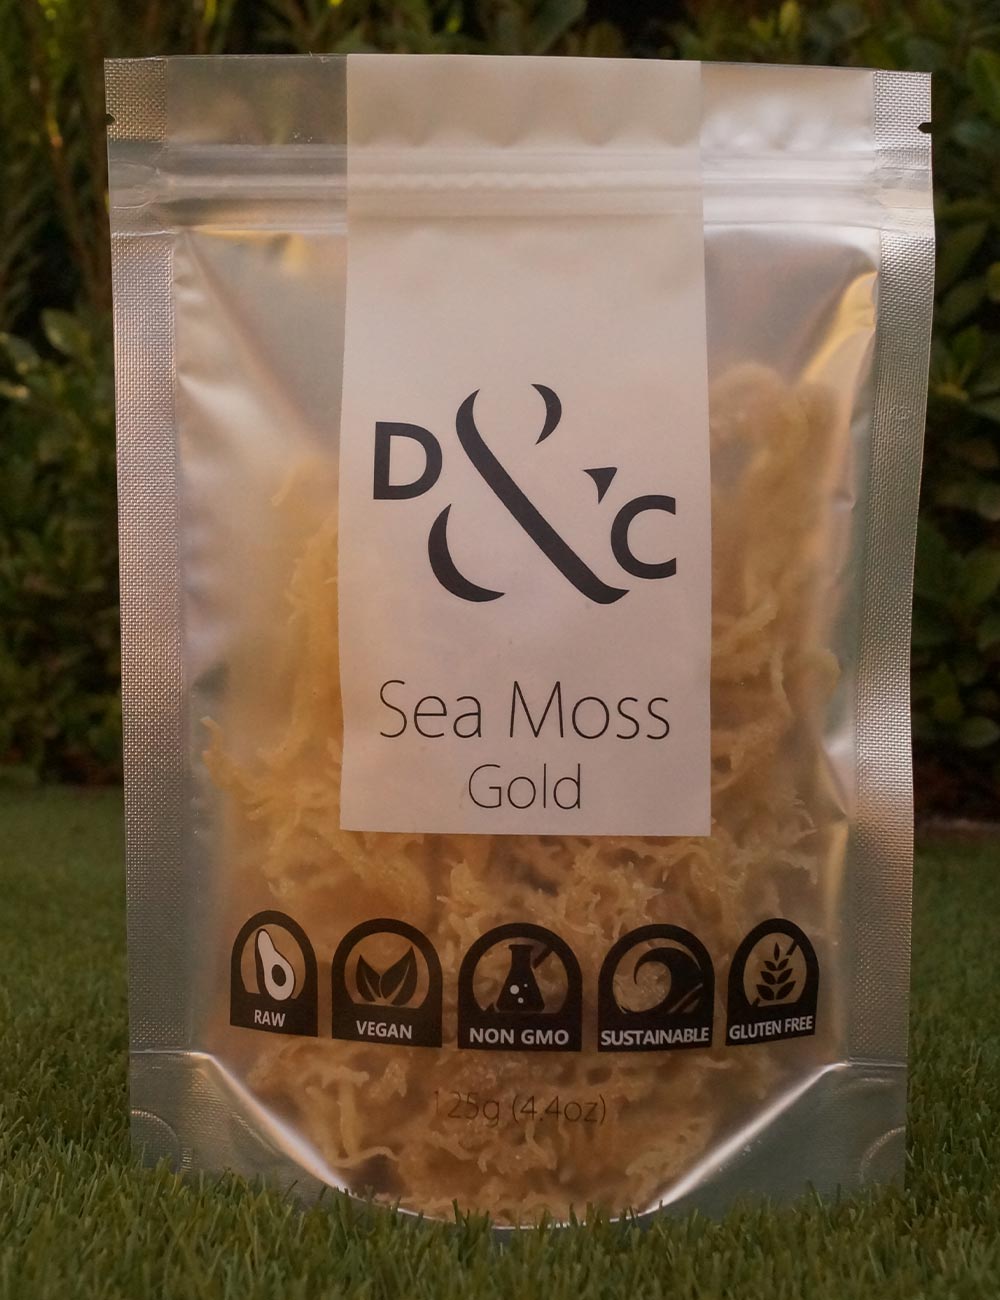 dried-sea-moss-gold-detox-and-cure-125g-bag-of-dry-sea-moss-outdoor-on-green-grass